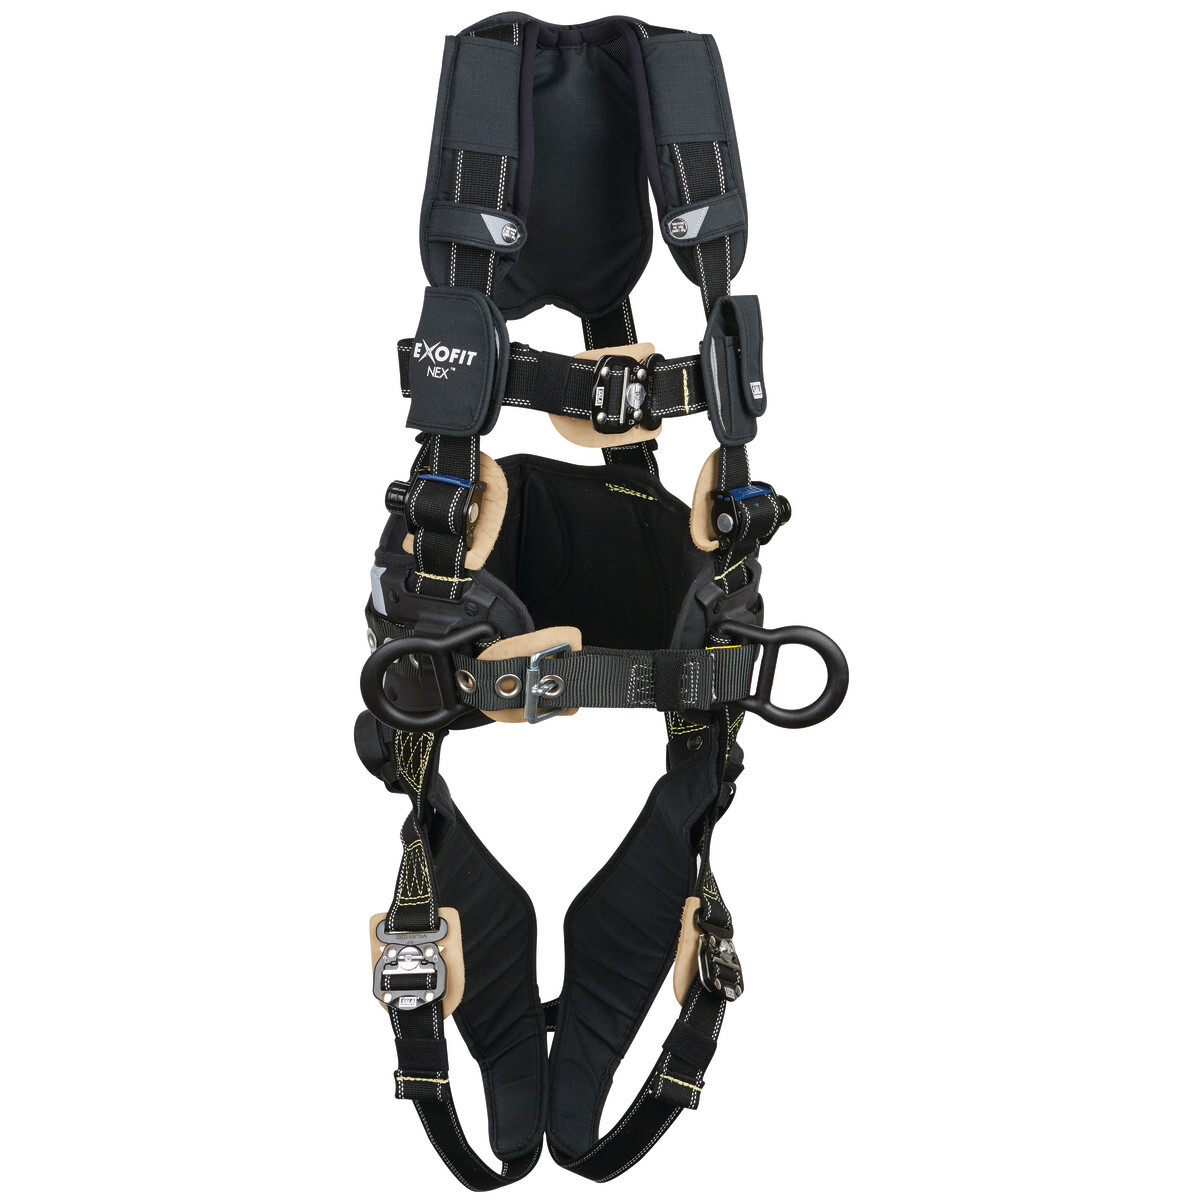 3M™ DBI-SALA® Small ExoFit NEX™ Arc Flash Construction/Full Body/Vest Style Harness With Tech-Lite™ PVC Coated Aluminum Back And